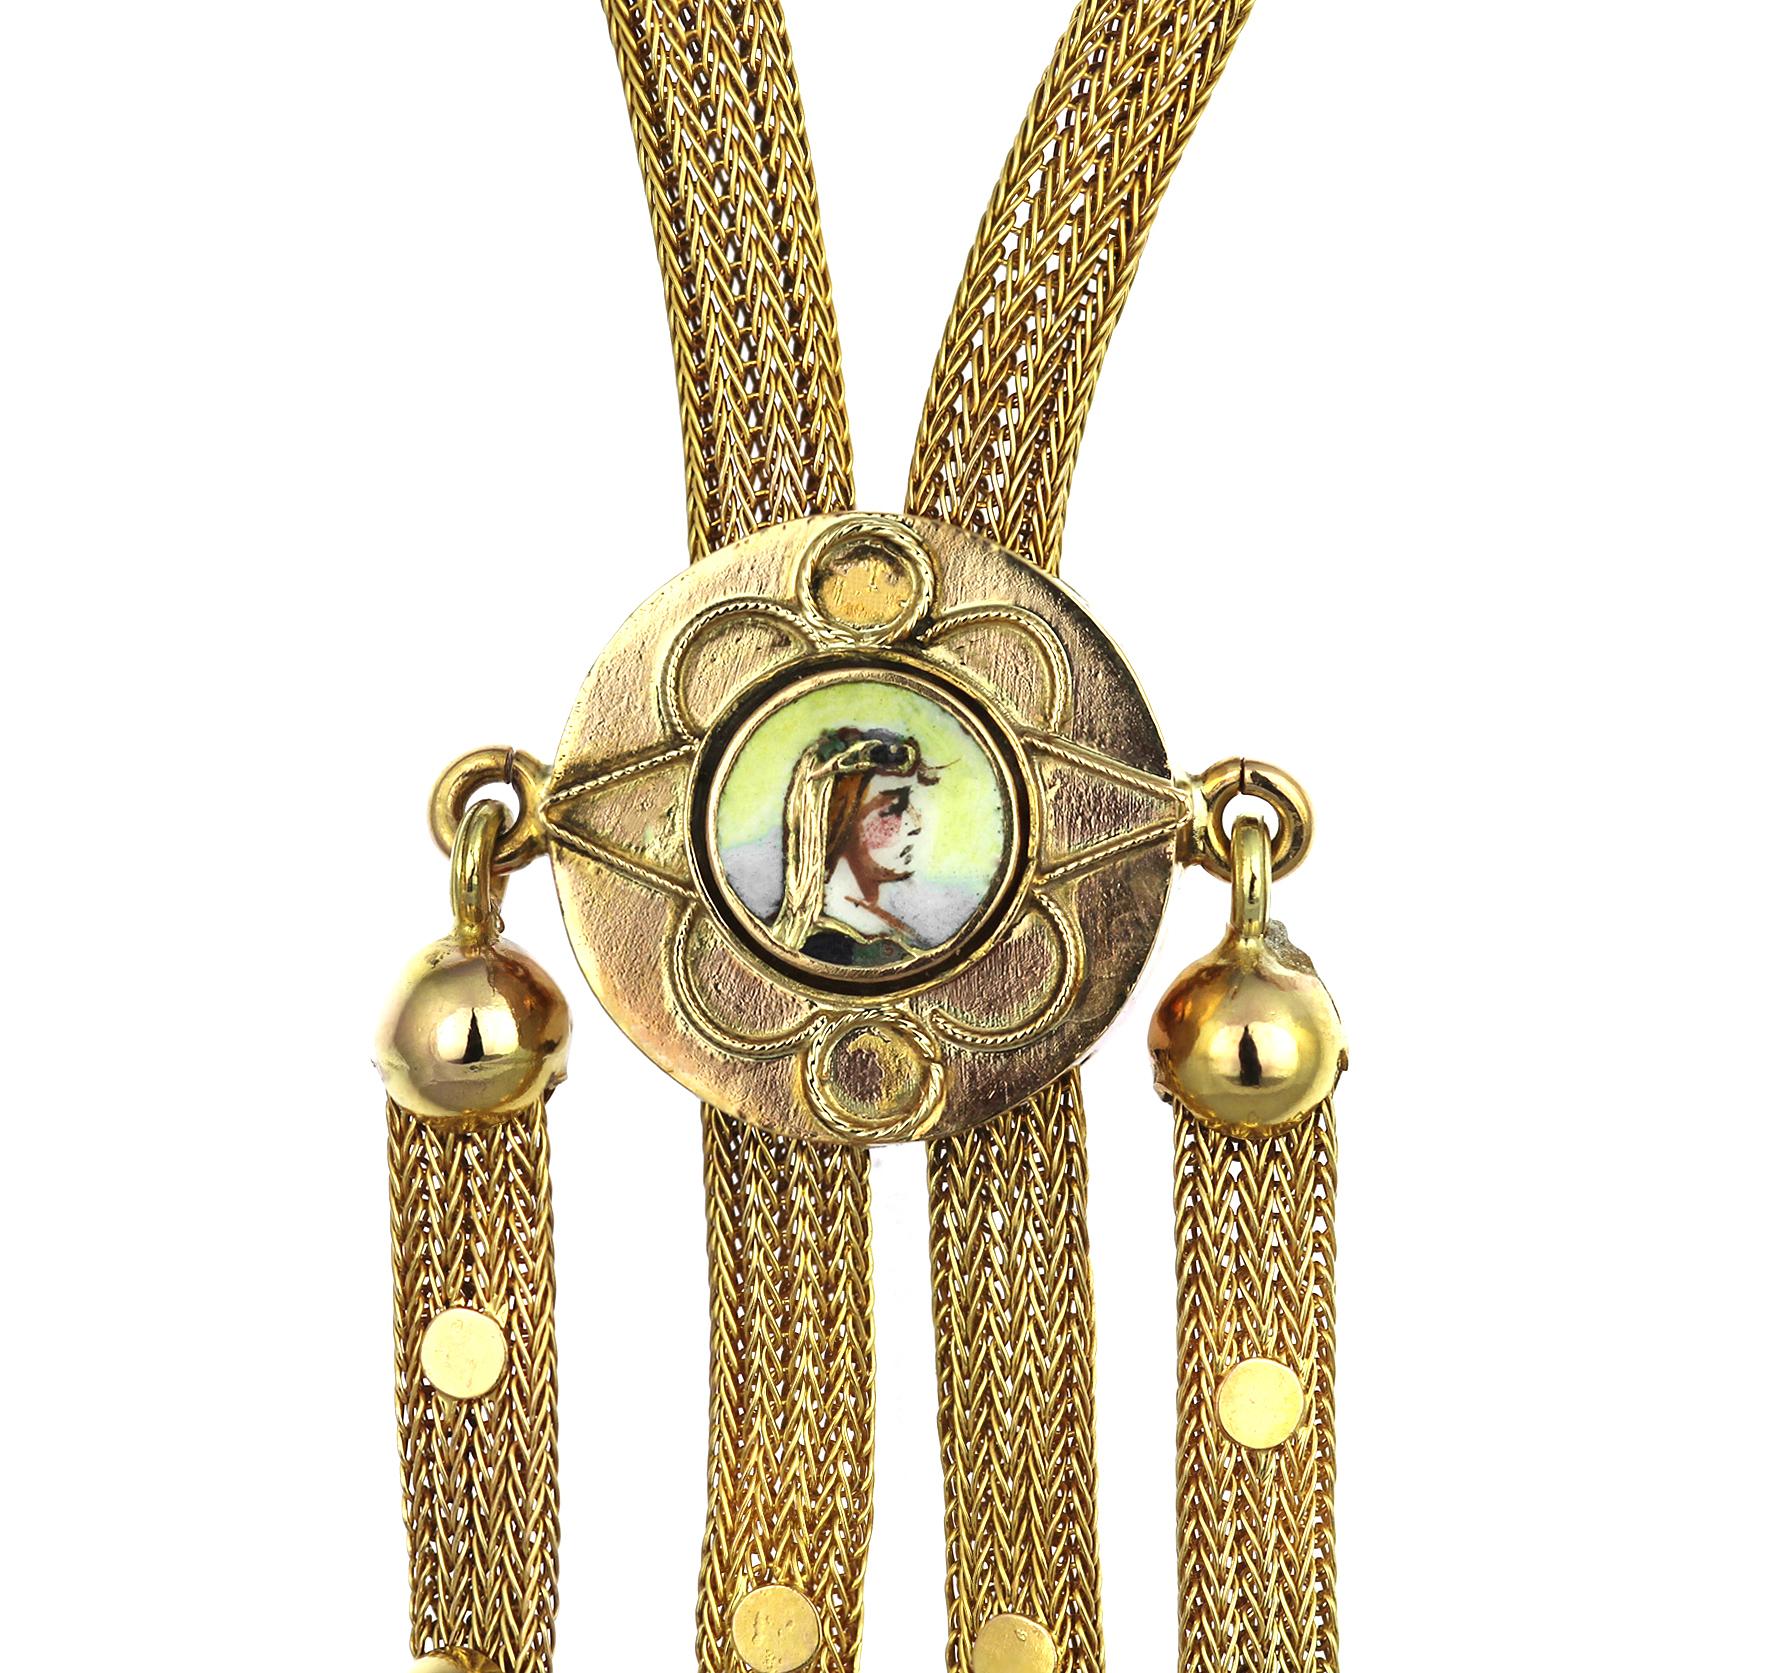 Women's Antique 1880 12K Gold Long Chain/Necklace with Tassel Links with Enamel Panel For Sale